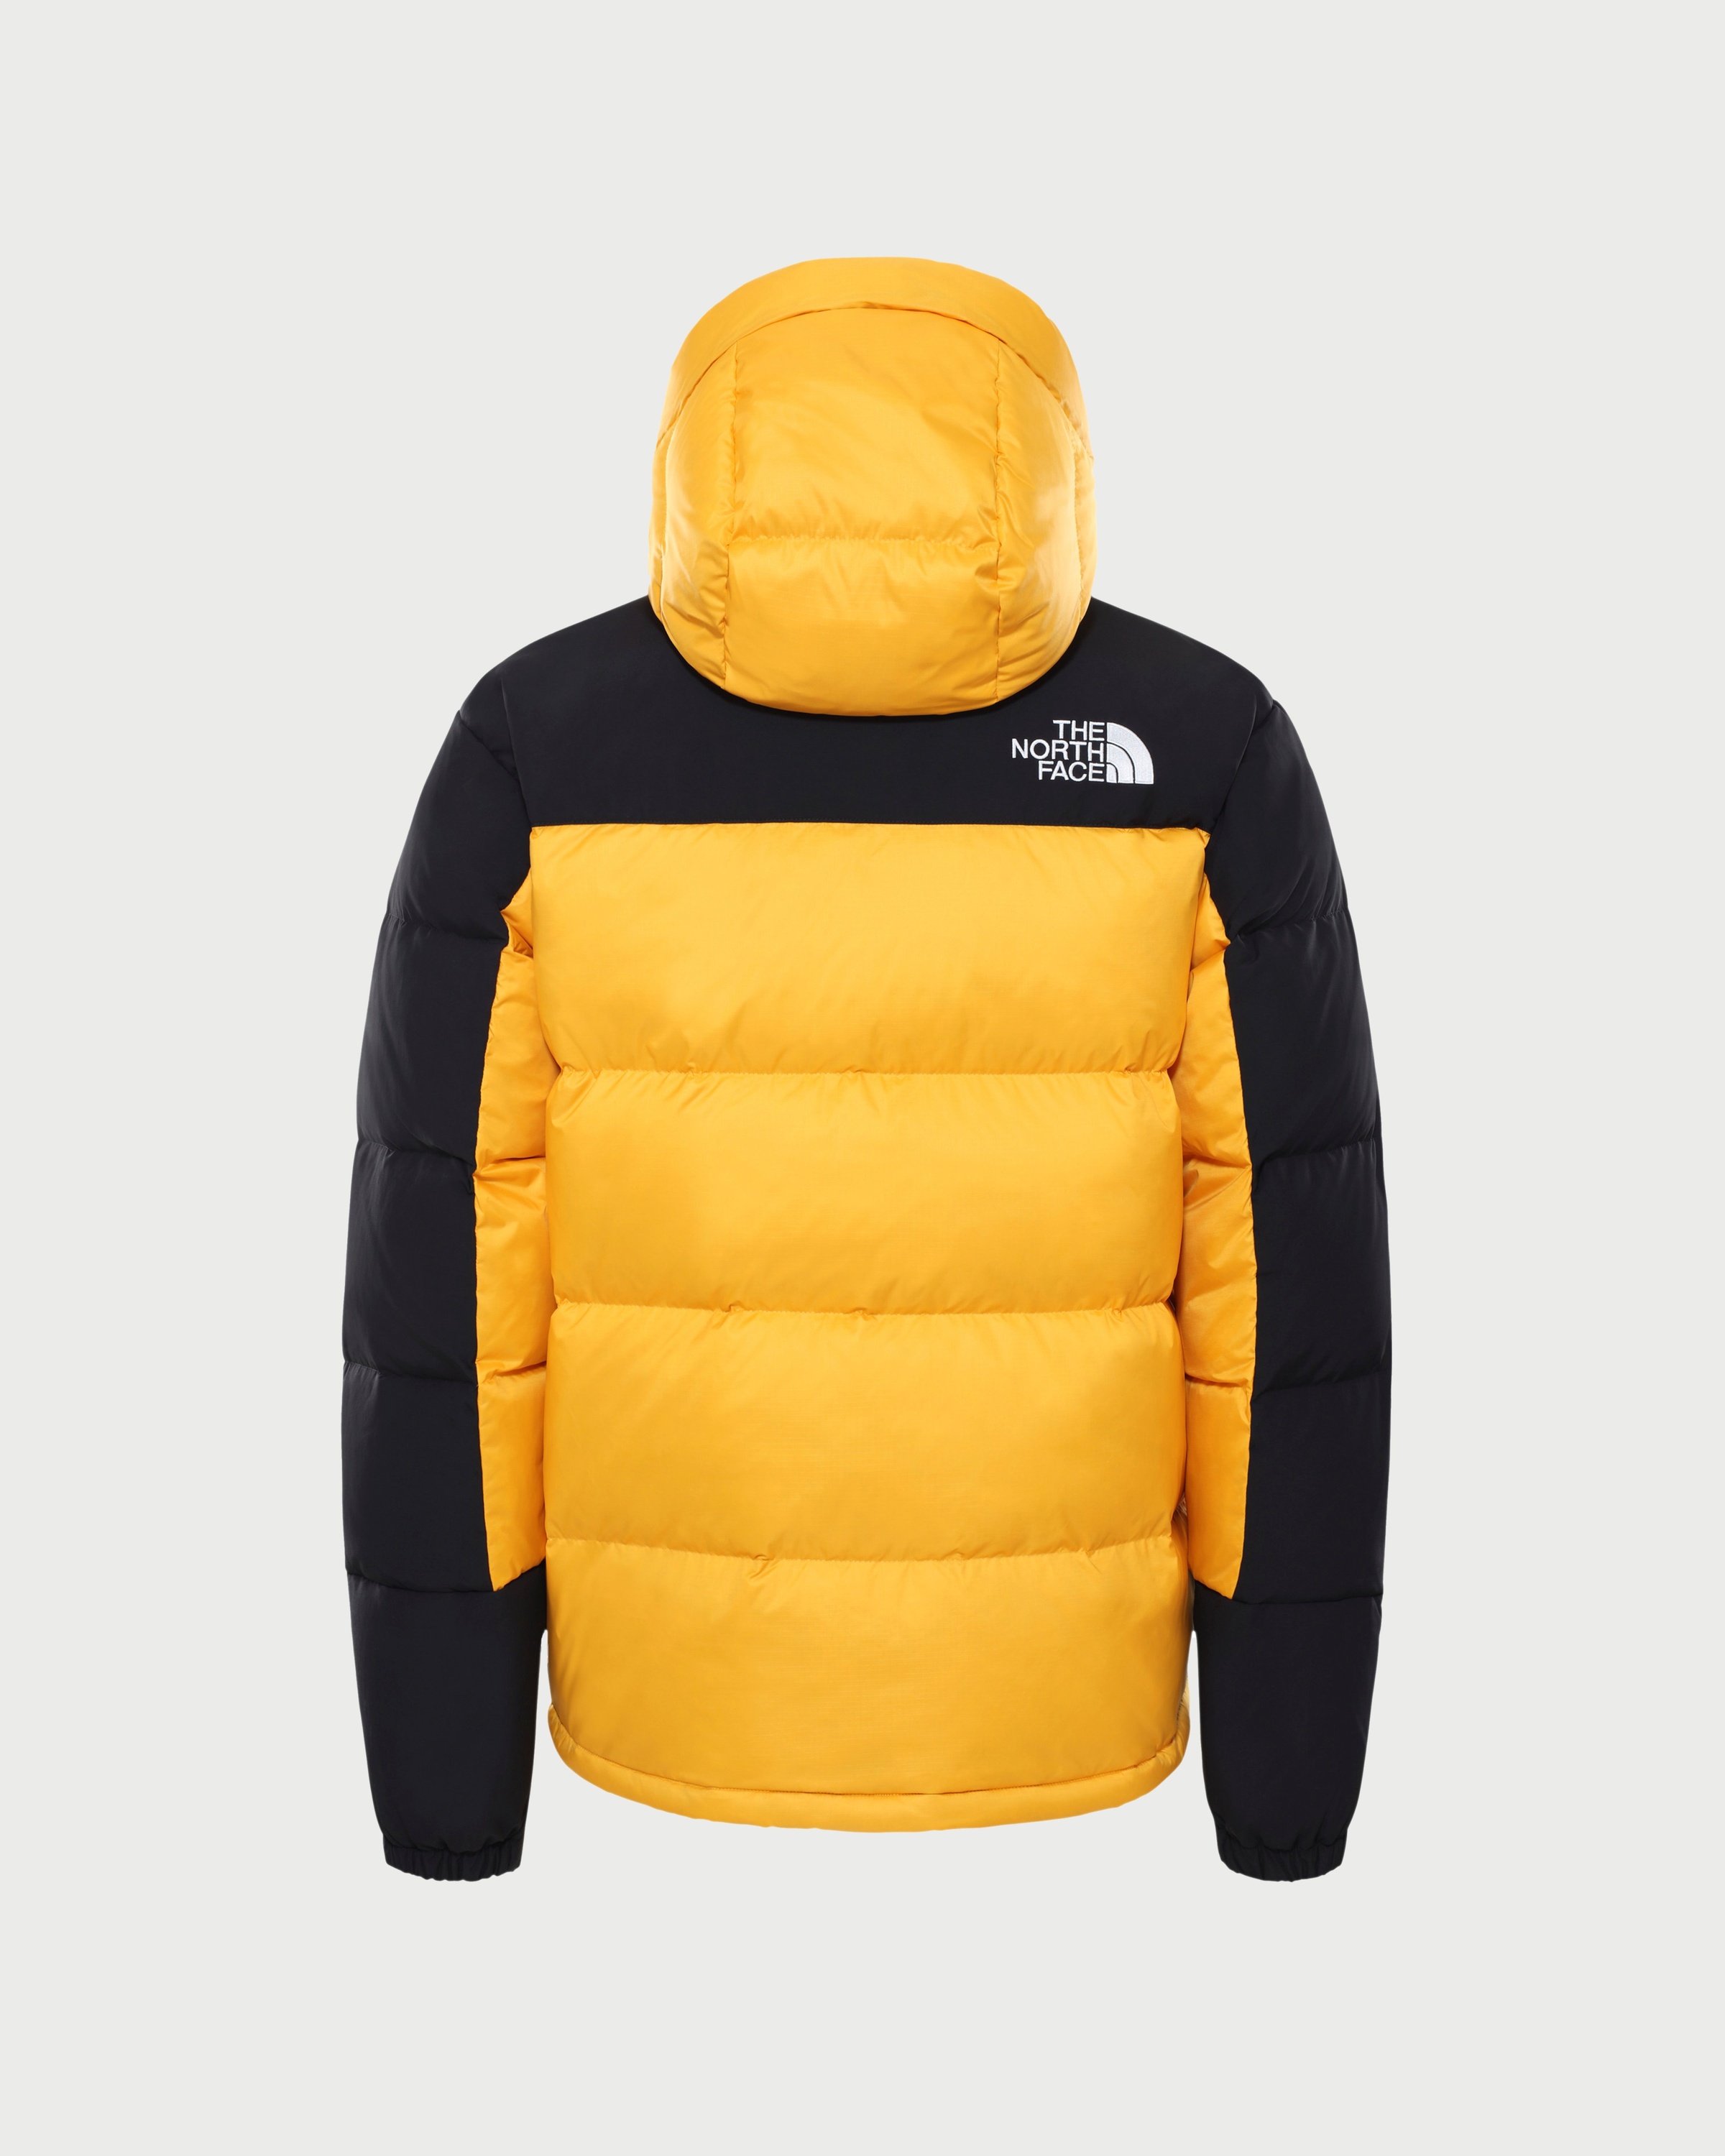 The North Face – Himalayan Down Jacket Peak Summit Gold Unisex